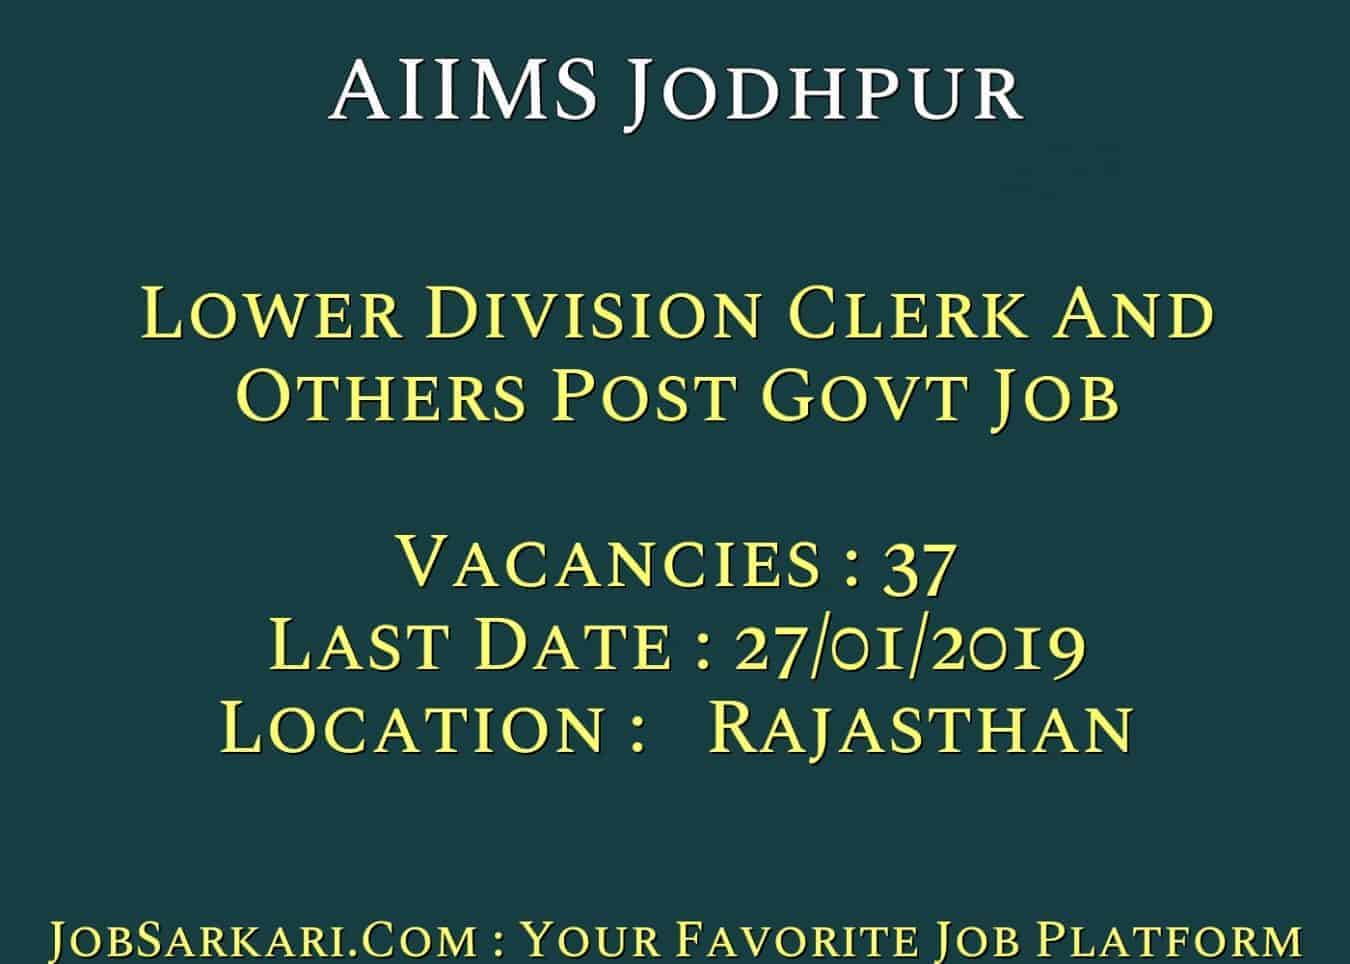 AIIMS Jodhpur Recruitment 2019 For Lower Division Clerk And Others Post Govt Job